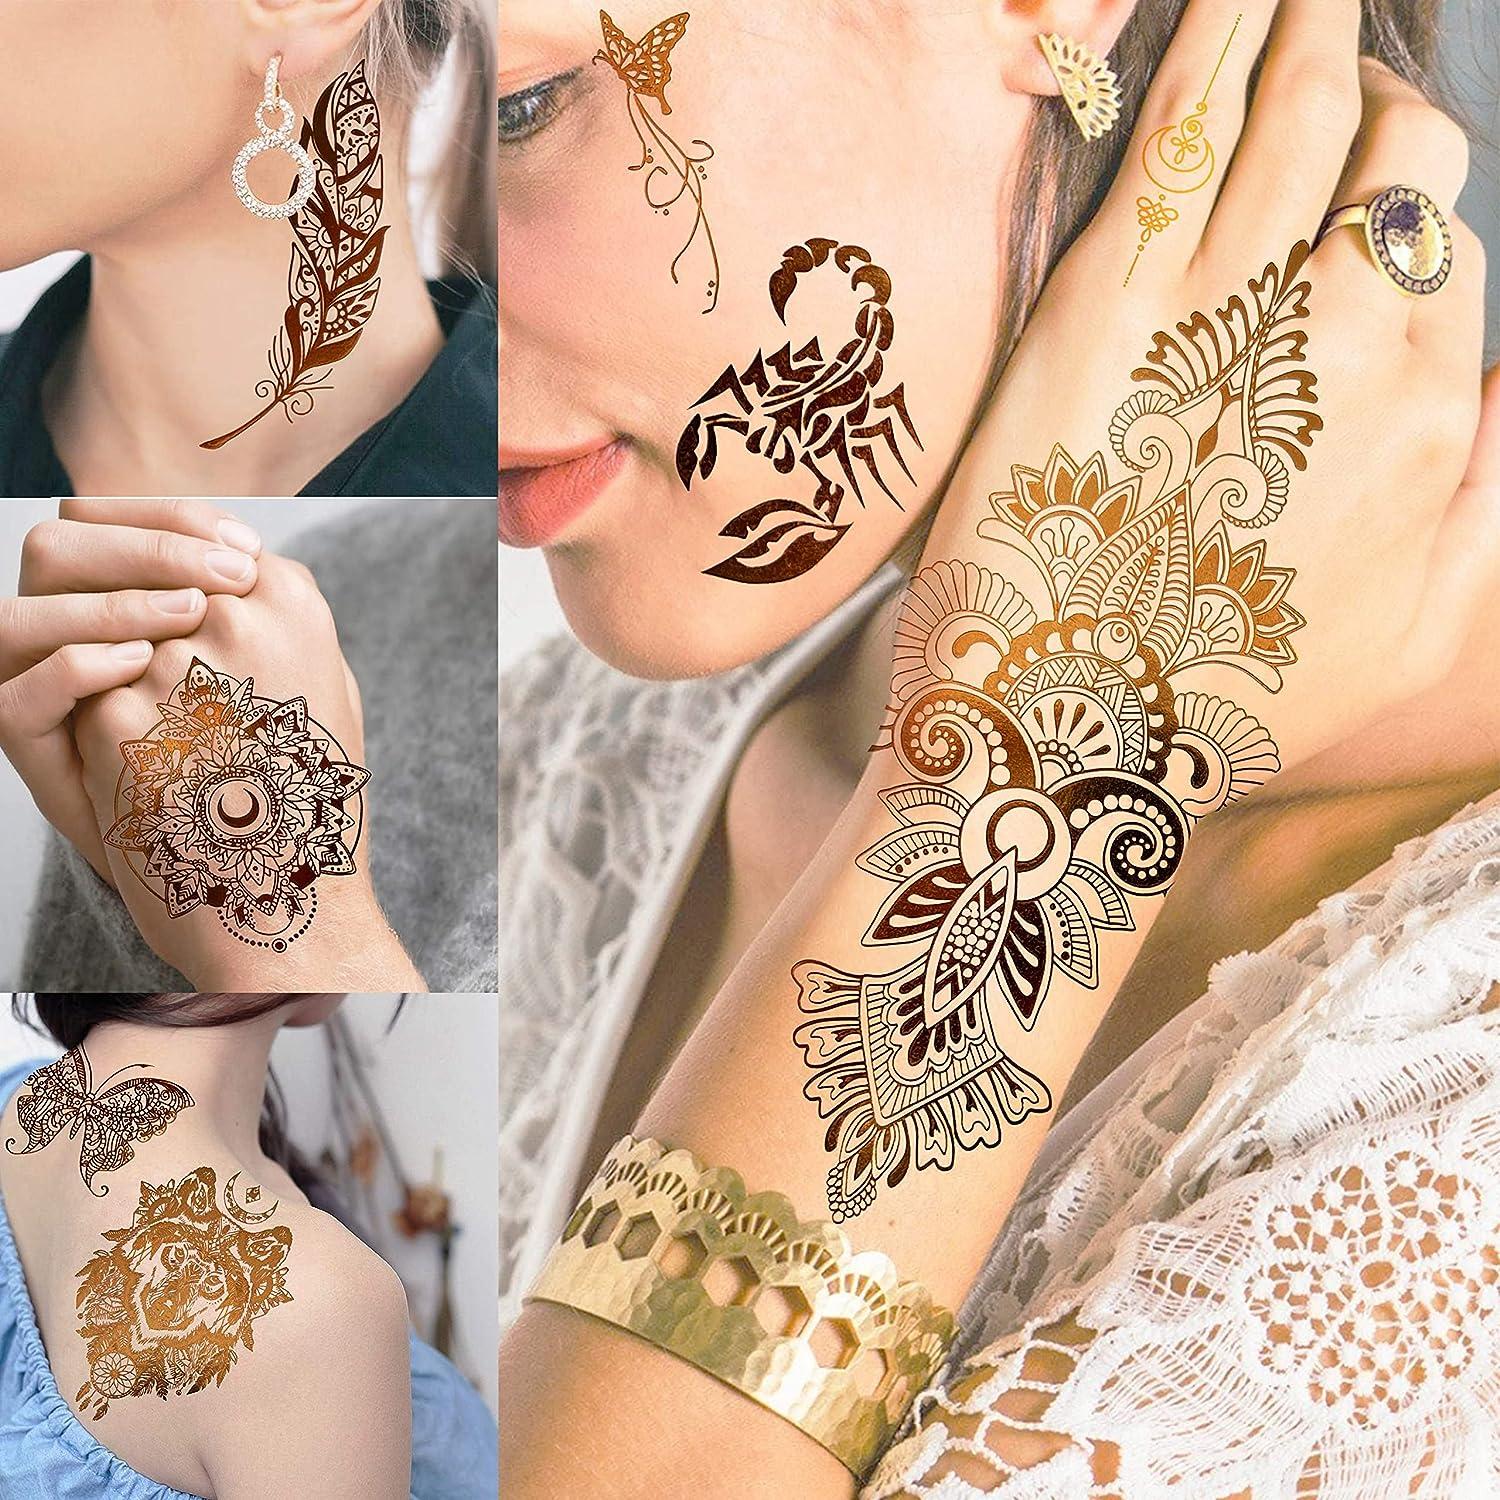 Everything About Temporary Gold Tattoo Ink Tattoos | Tattoos Spot